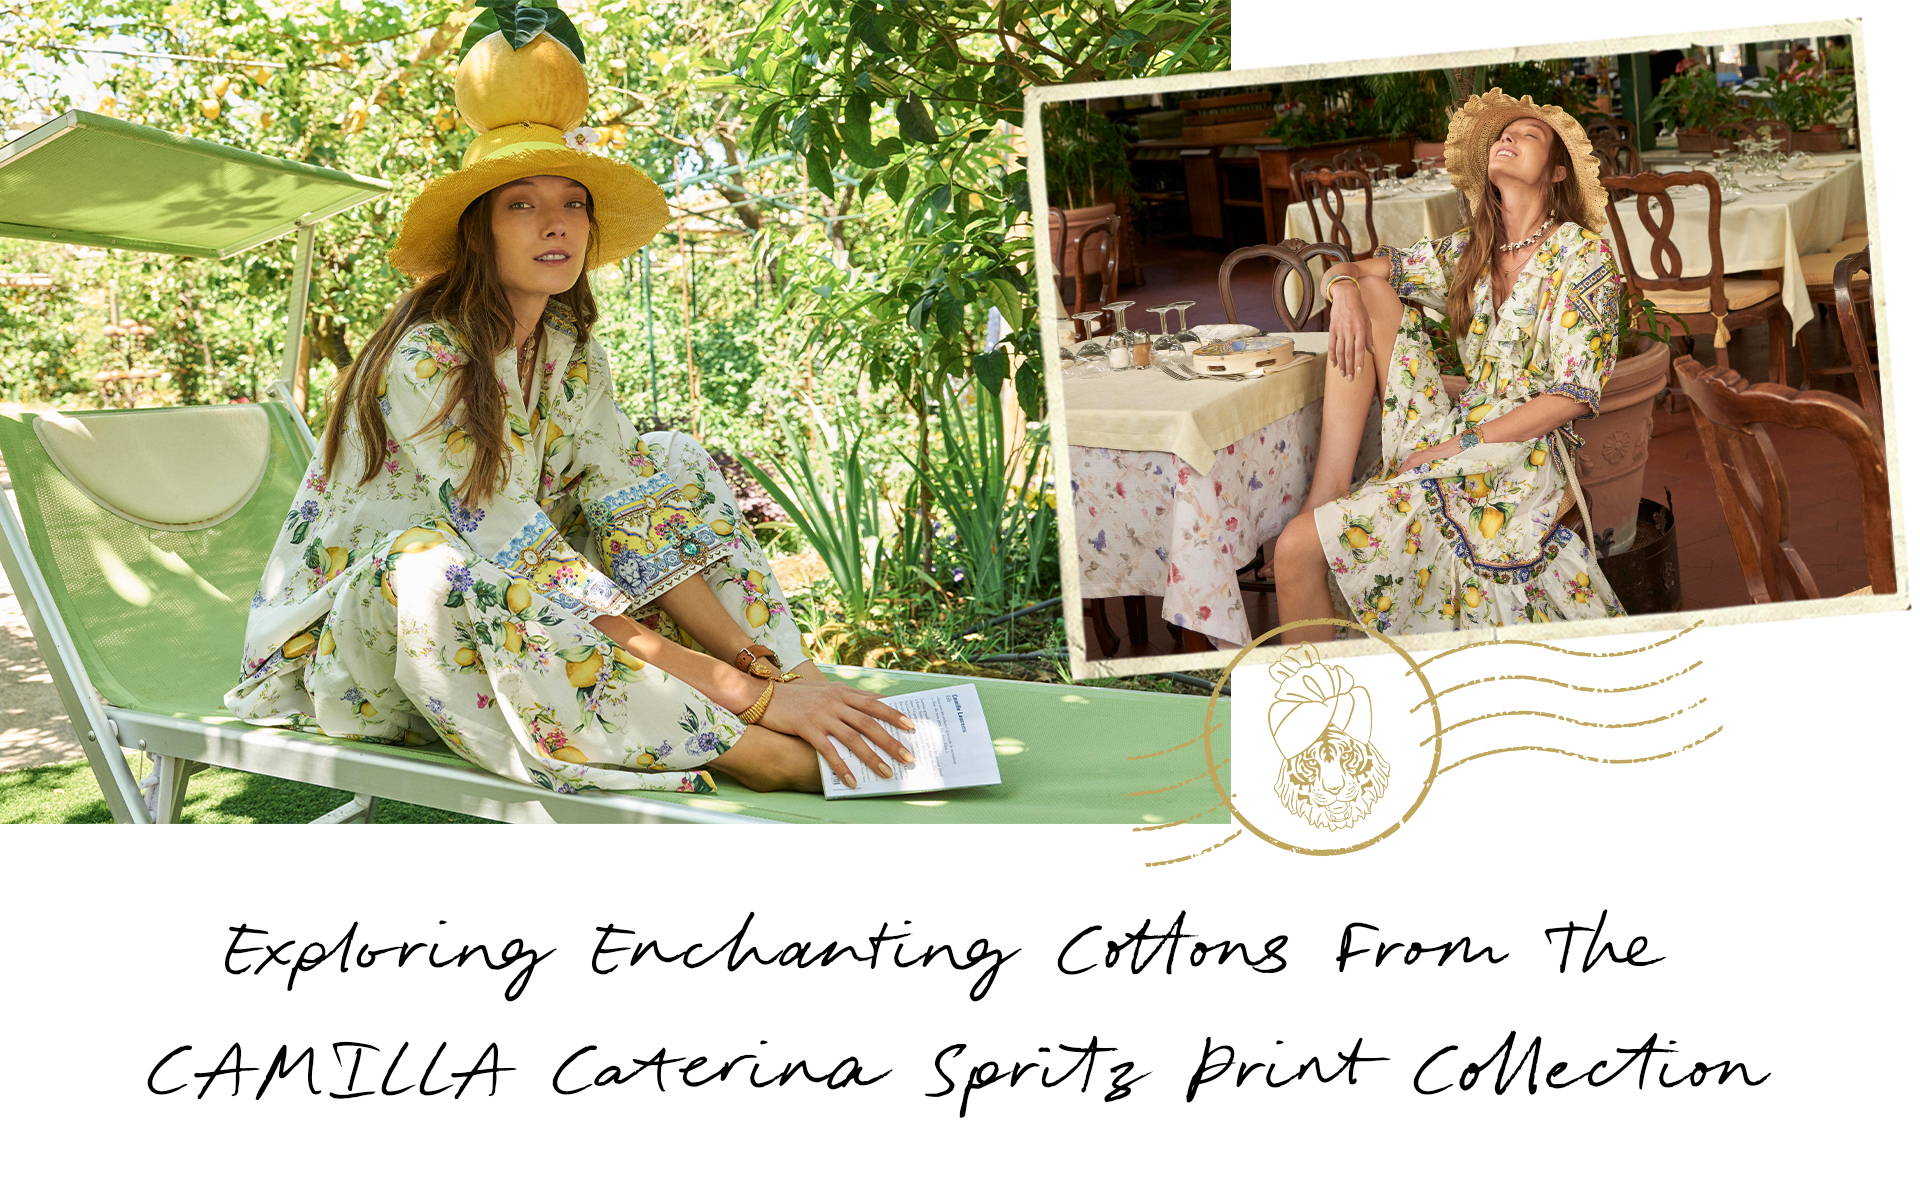 EXPLORING ENCHANTING COTTONS FROM THE CAMILLA CATERINA SPRITZ COLLECTION